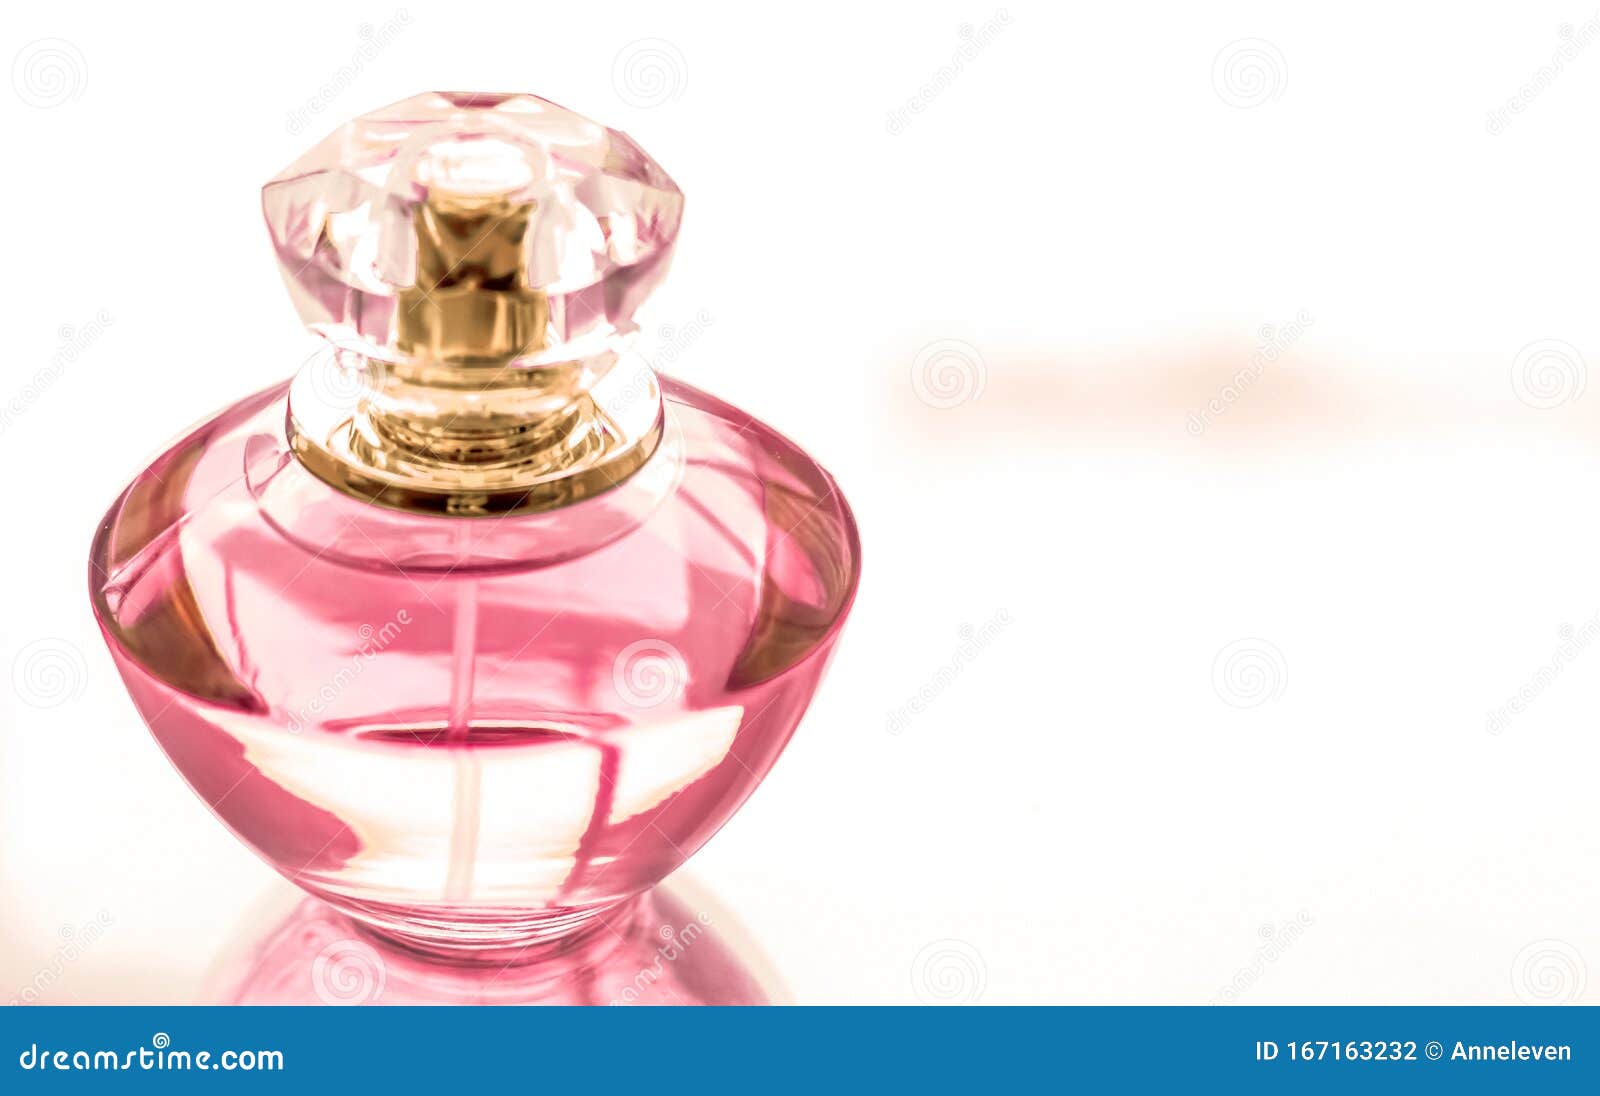 Perfumery, Spa And Branding Concept - Pink Perfume Bottle On Glossy  Background, Sweet Floral Scent, Glamour Fragrance And Eau De Parfum As  Holiday Gift And Luxury Beauty Cosmetics Brand Design Stock Photo